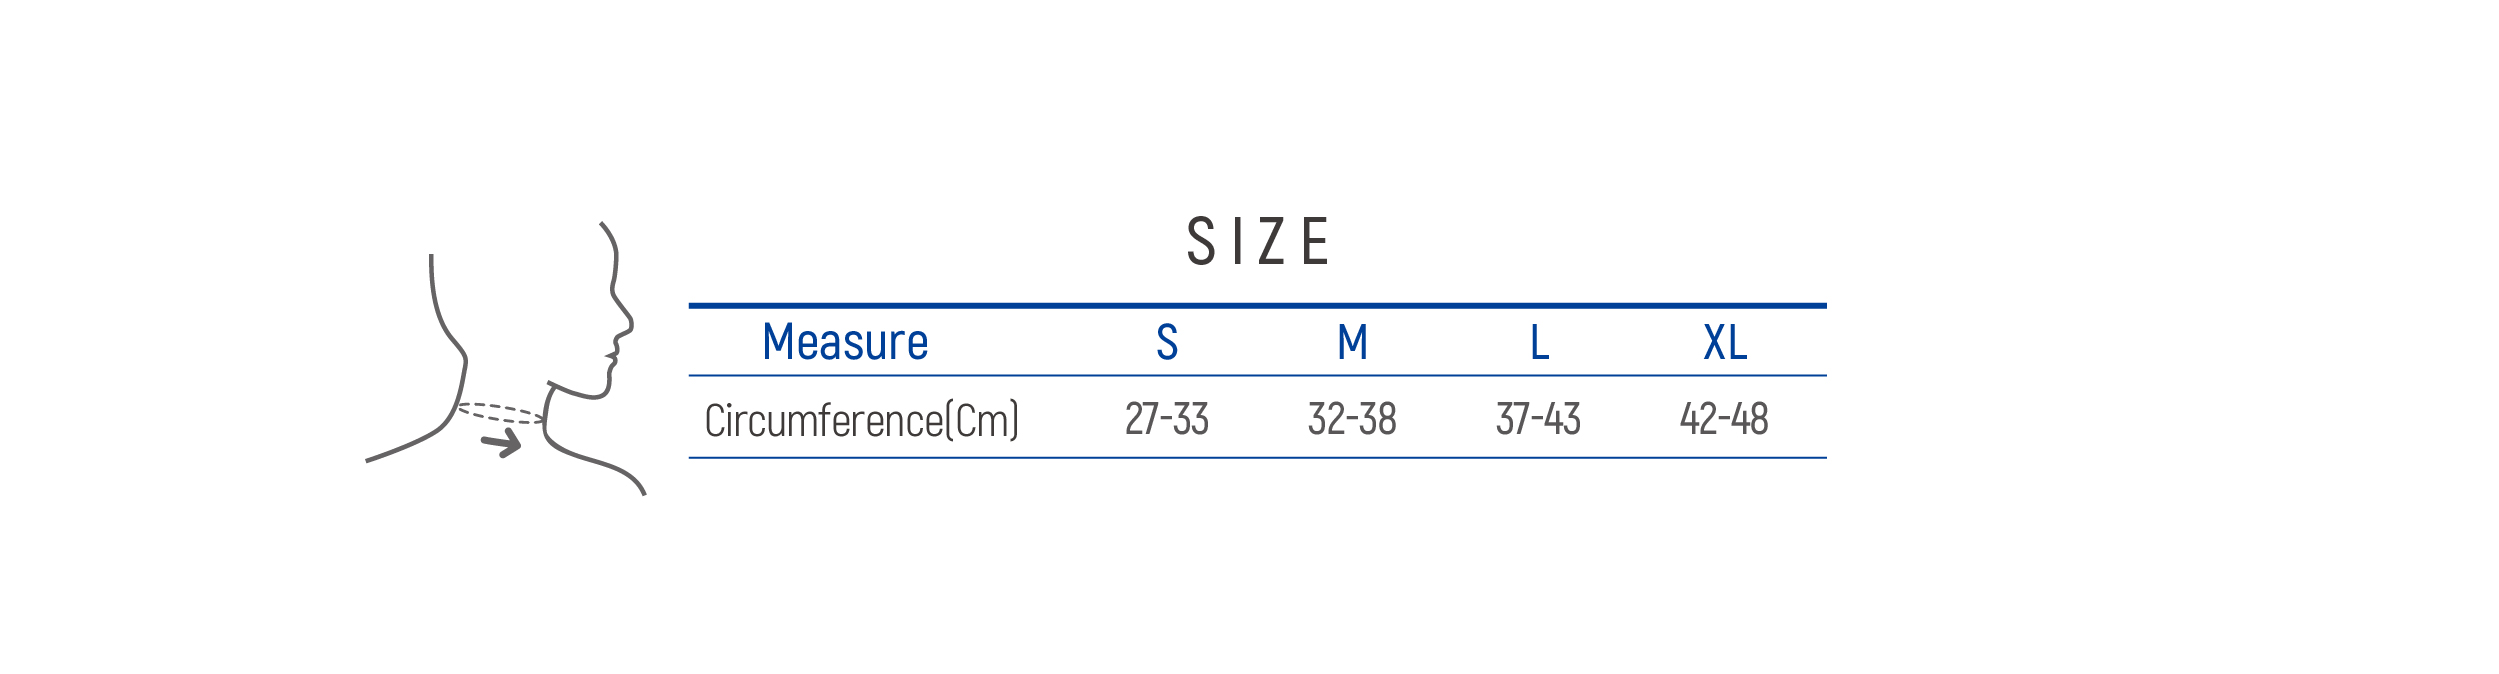 Soft Cervical Collar sizes and measurements